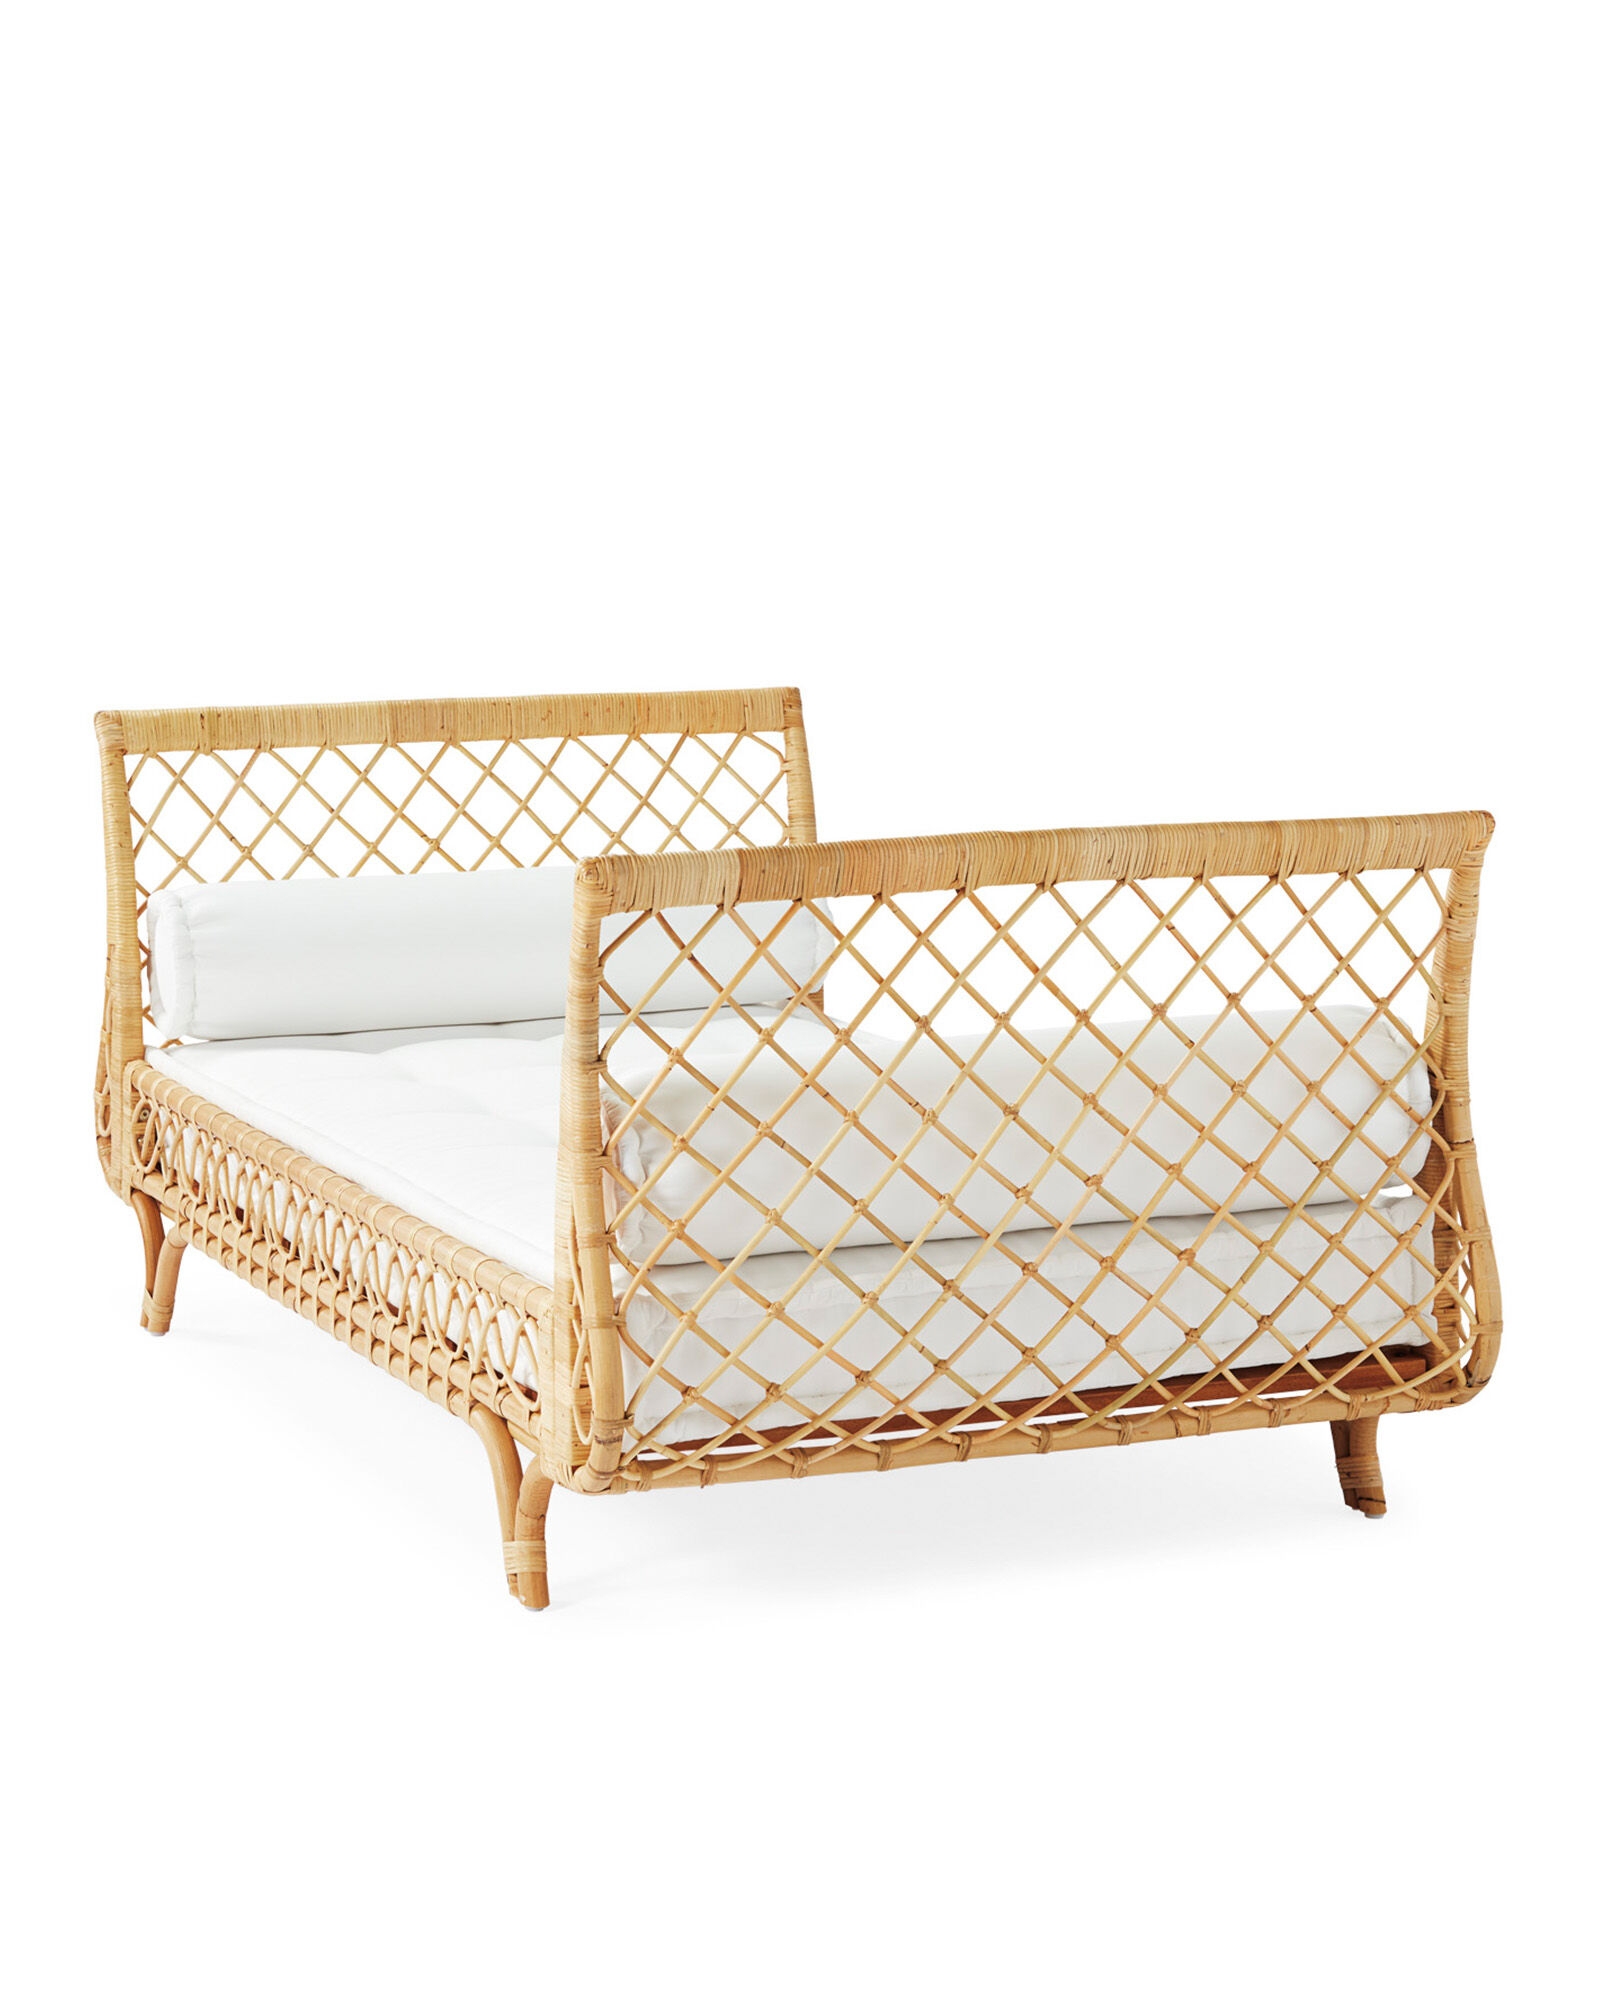 Avalon Rattan Daybed - Image 0